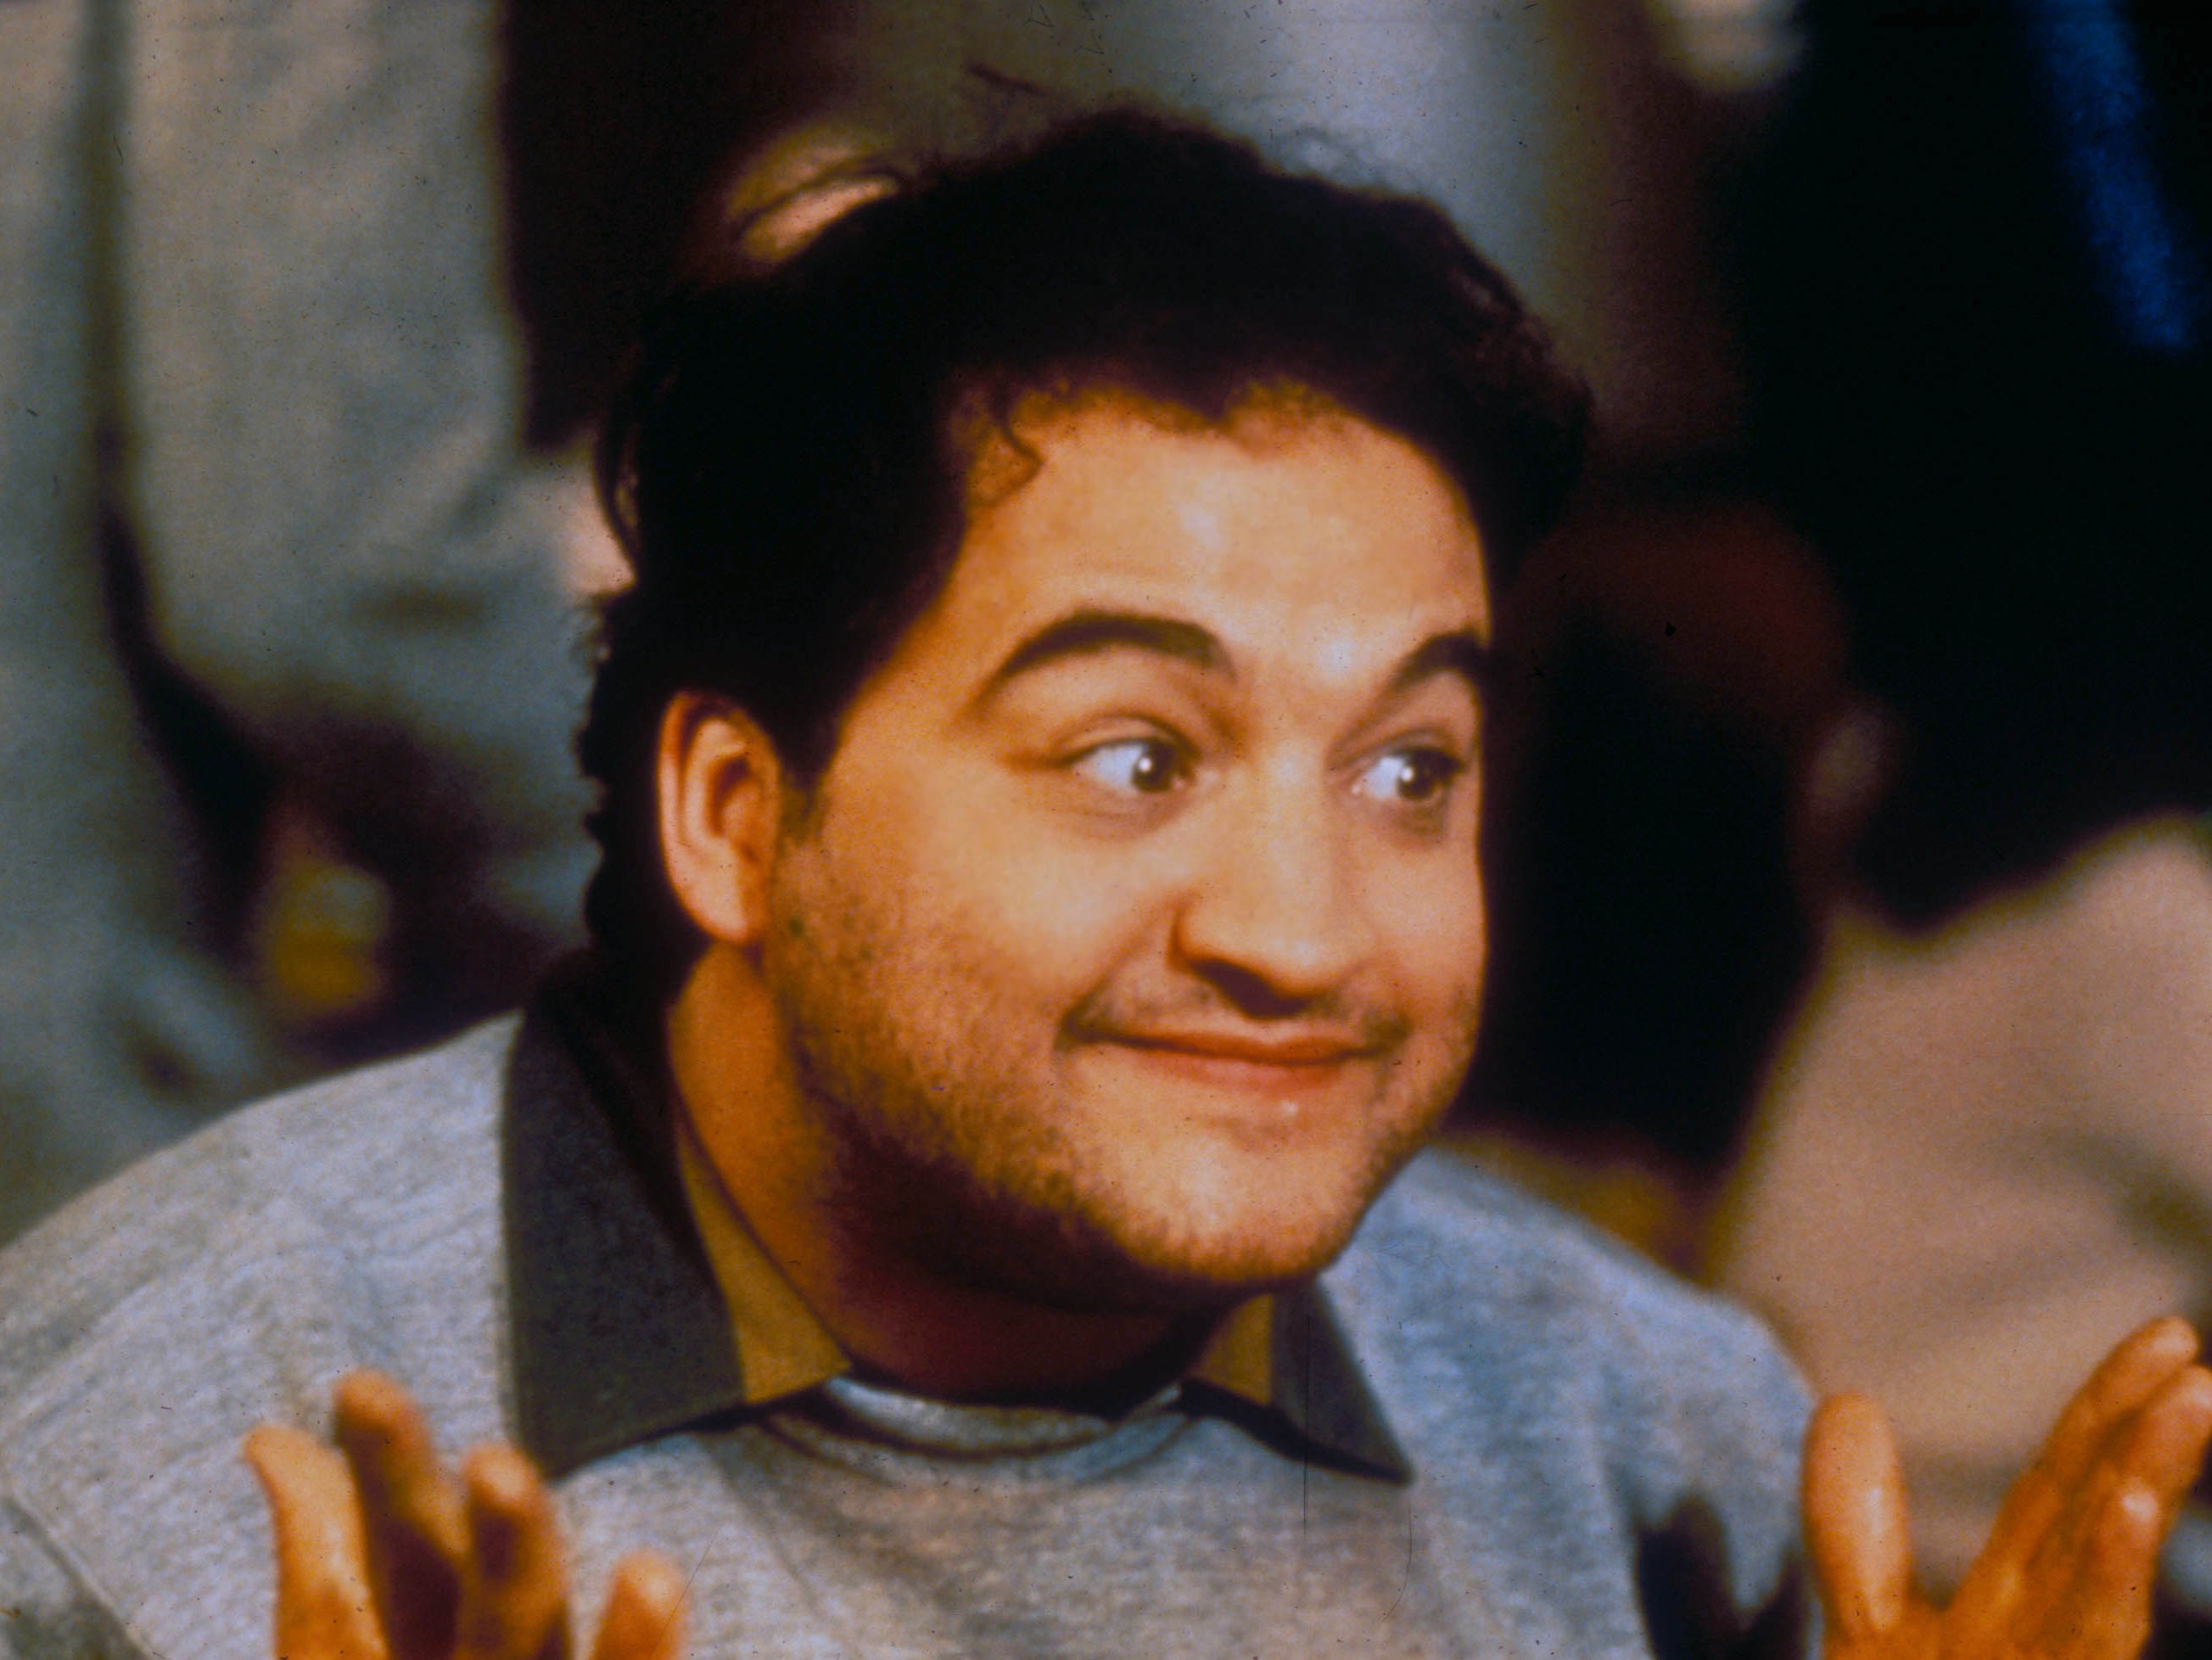 Belushi in his celebrated role of Bluto in ‘National Lampoon’s Animal House’